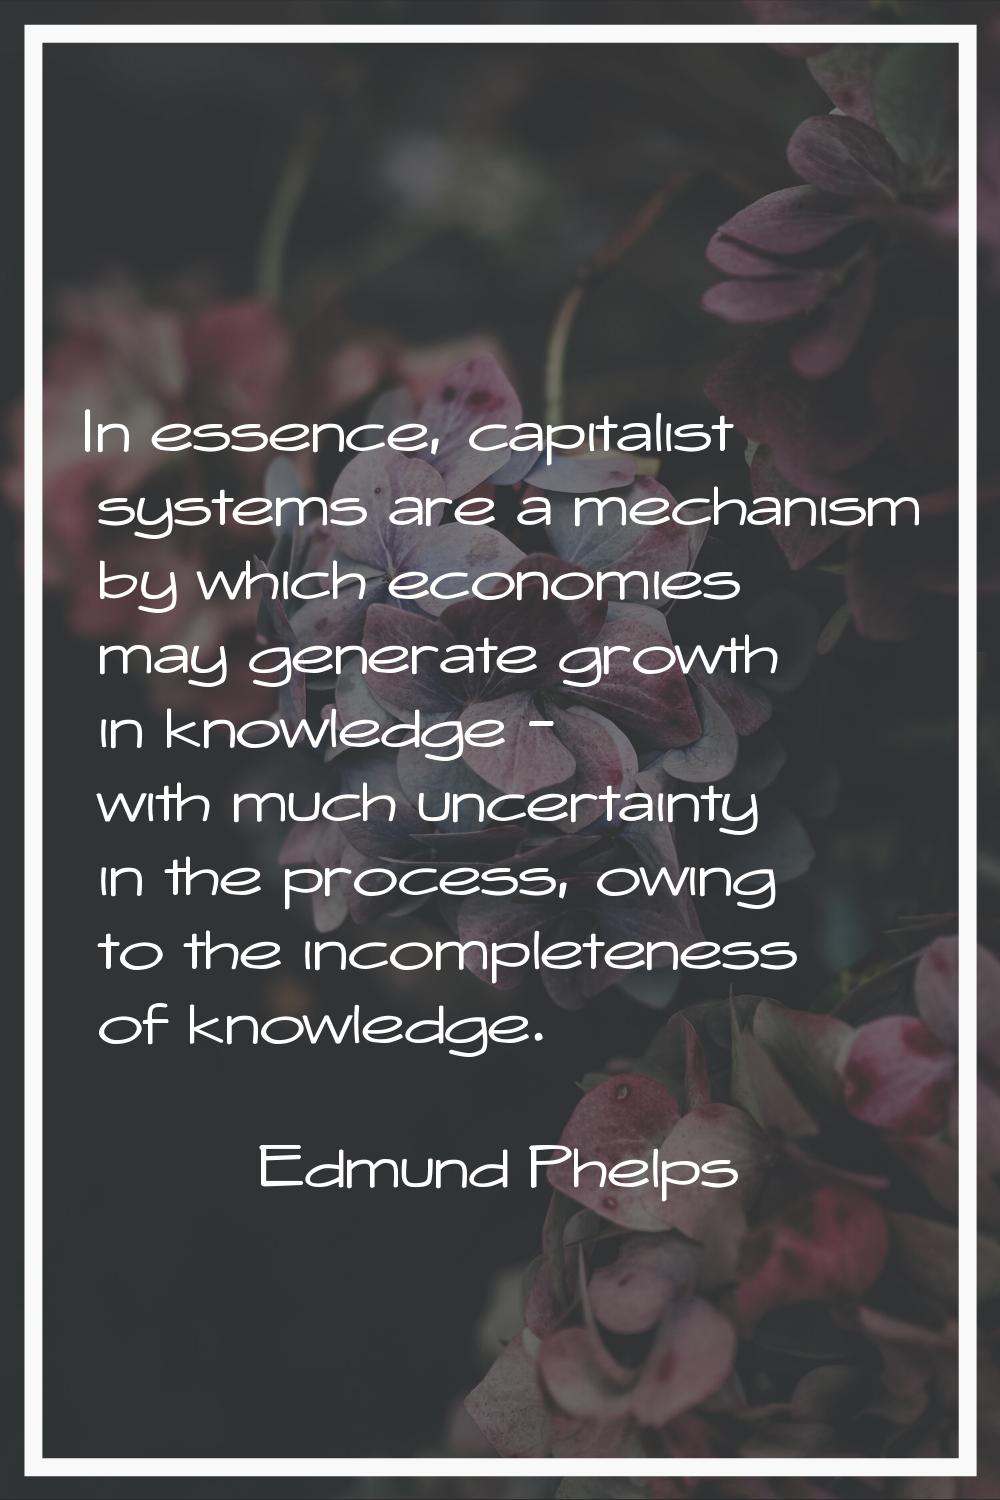 In essence, capitalist systems are a mechanism by which economies may generate growth in knowledge 